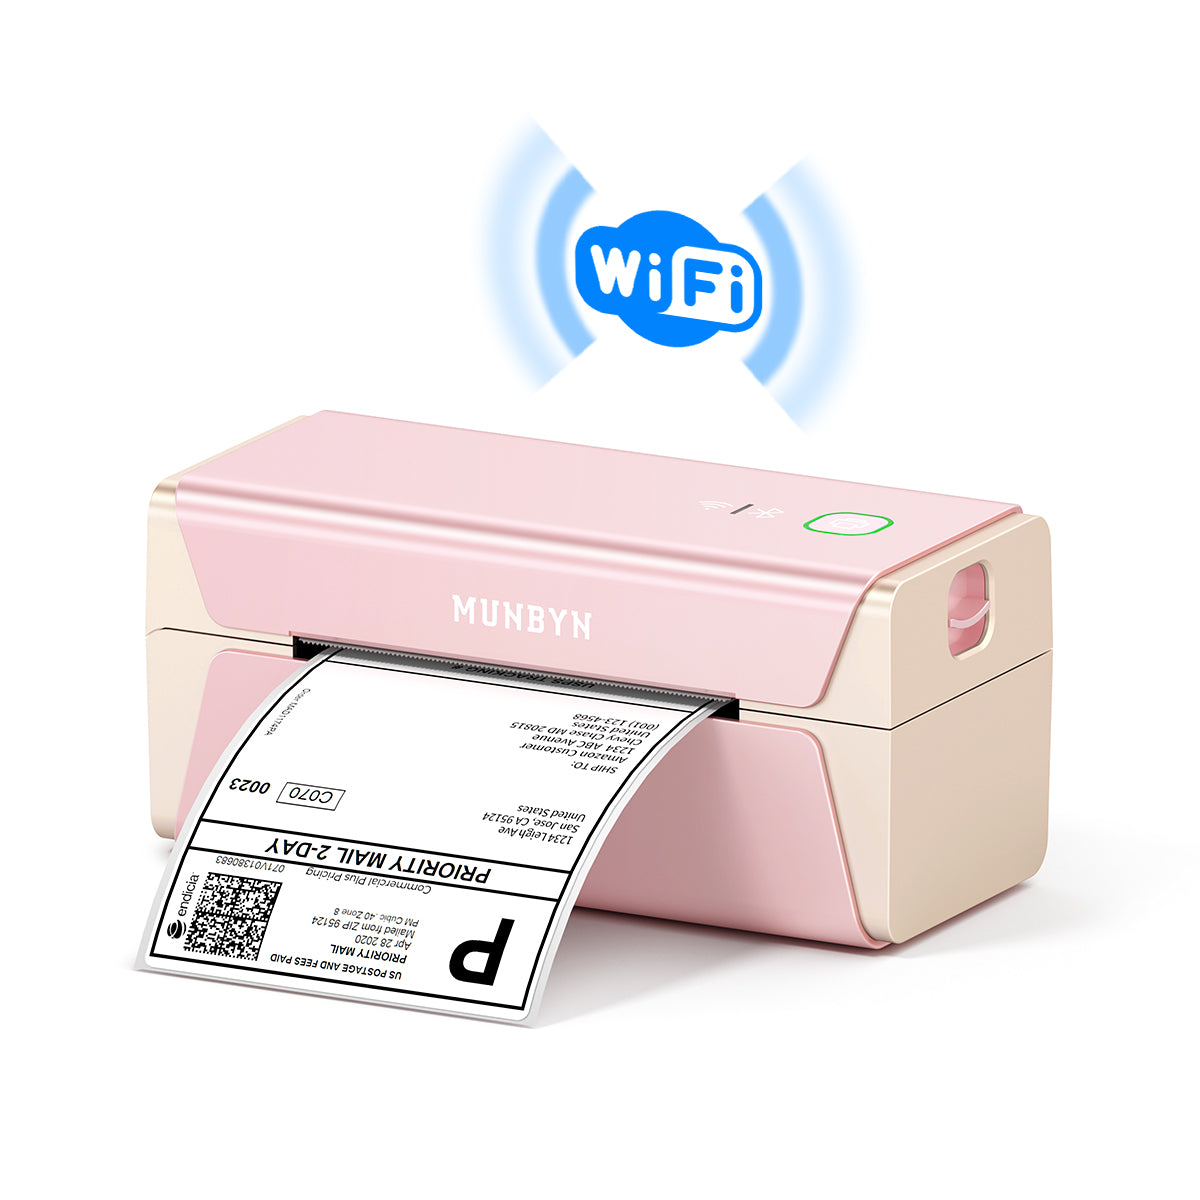 MUNBYN offers the RealWriter 401 AirPrint printer in two colors, supporting both WiFi and USB-connected devices.